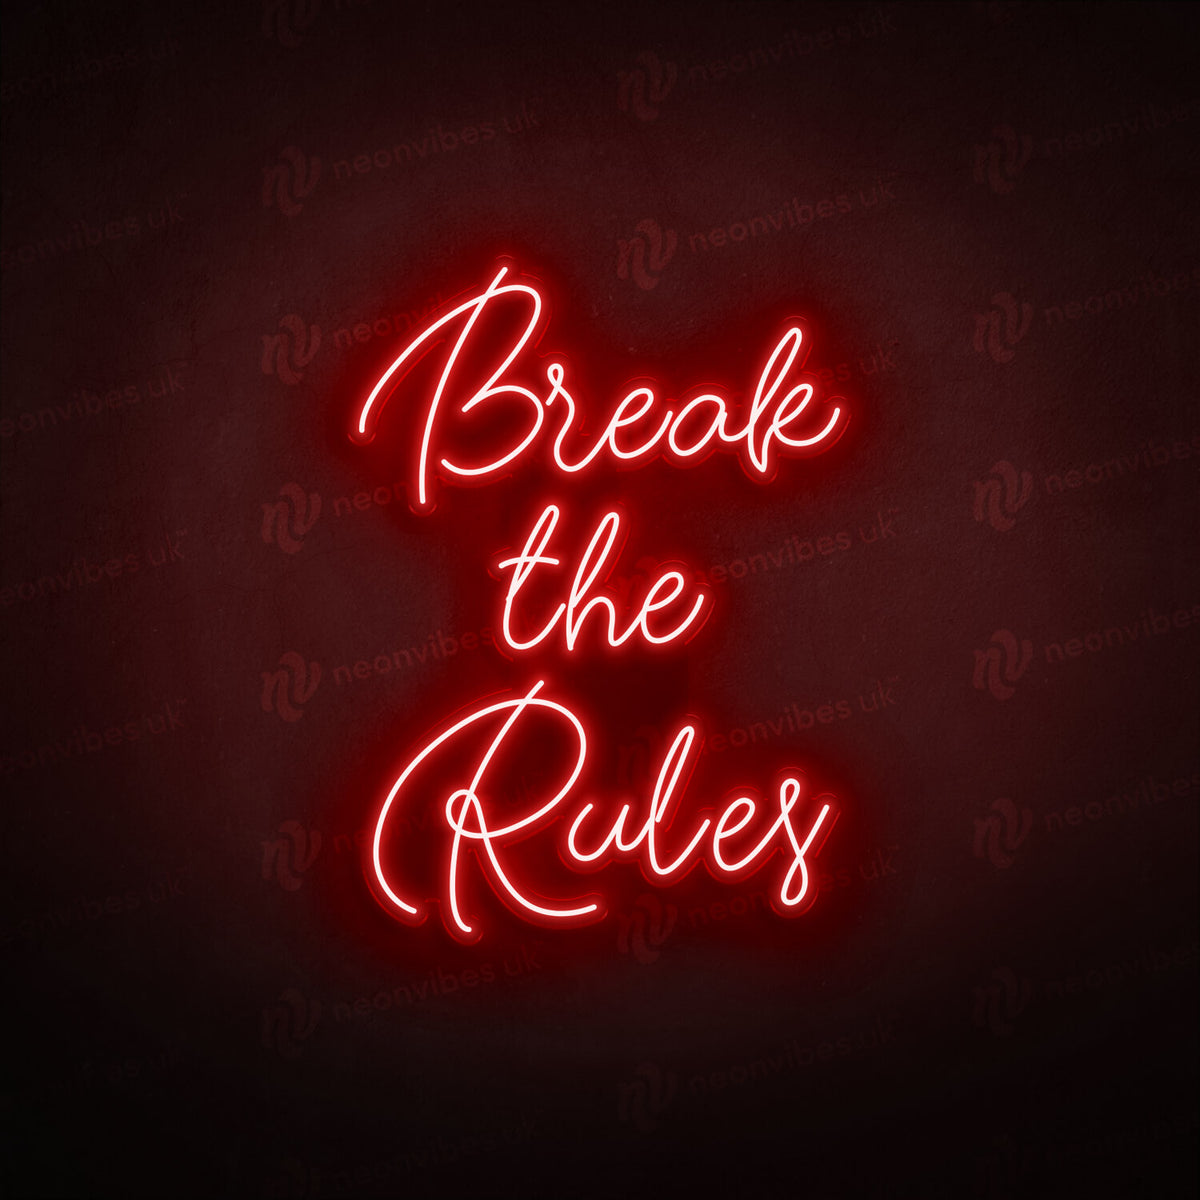 Break the rules neon sign